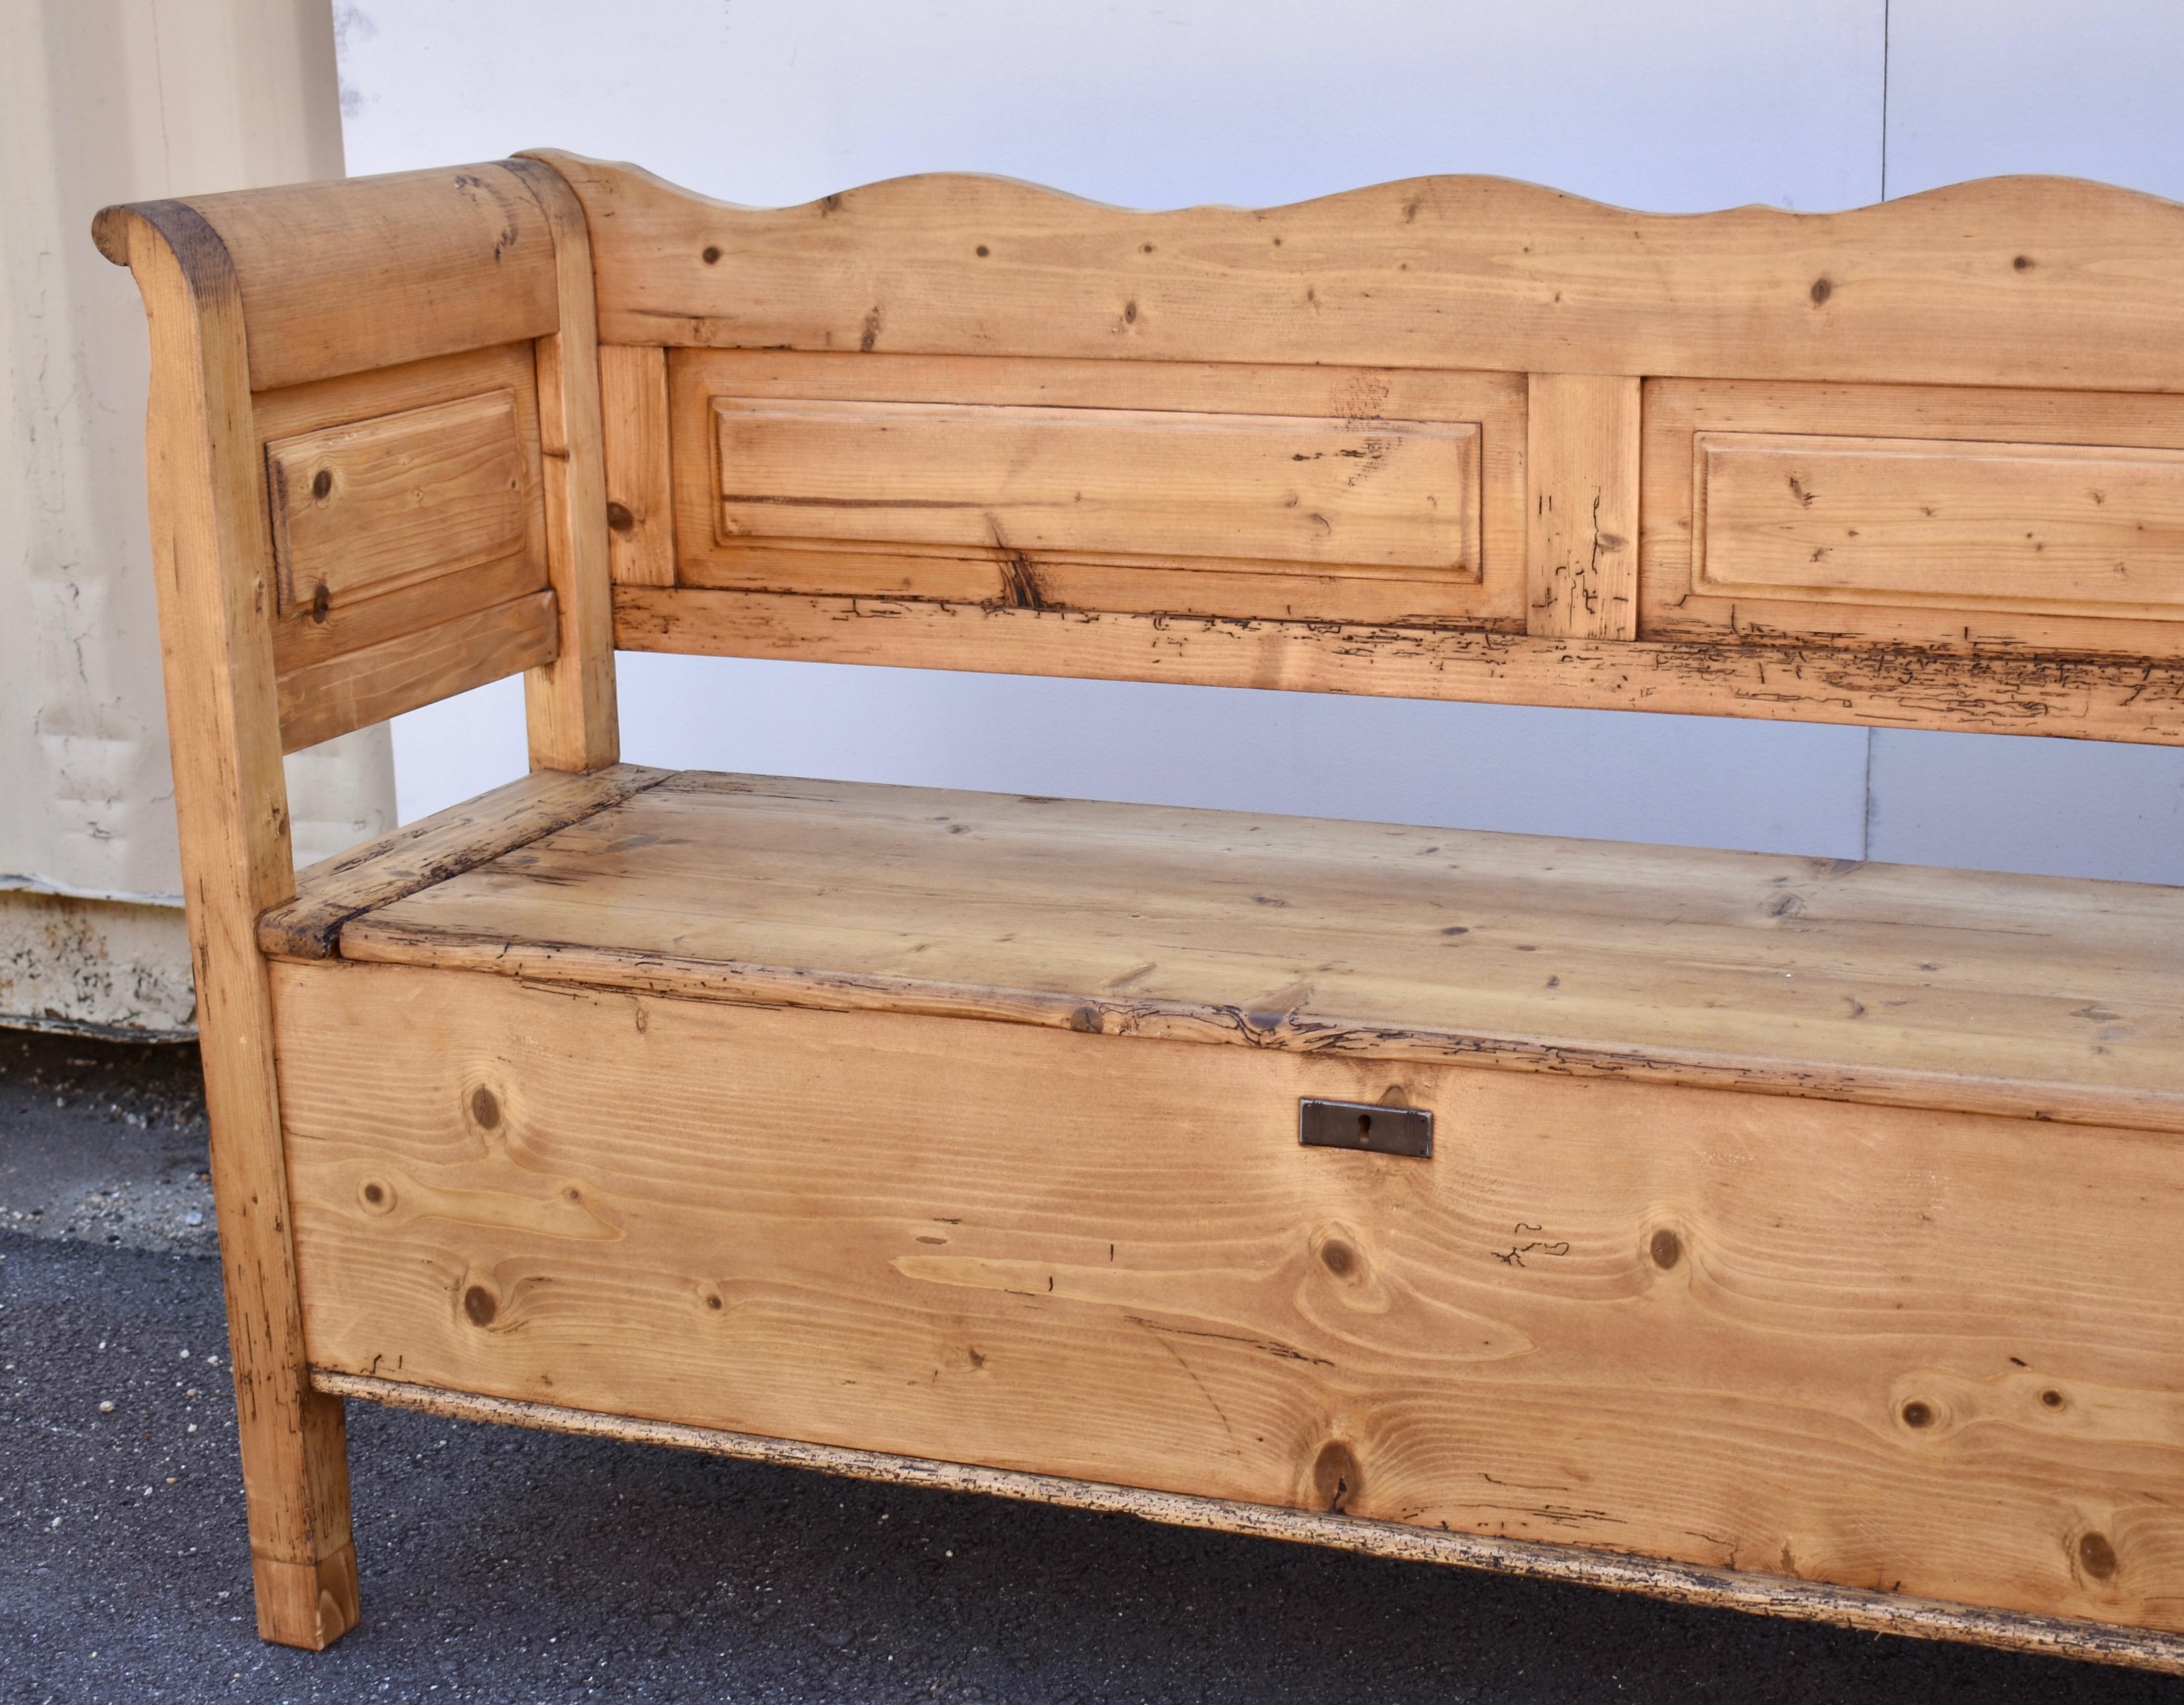 At almost ten feet long, this is quite the longest Hungarian box bench we have offered for sale.  Beneath a curvilinear top rail and a straight bottom rail are four raised panels.  The leg is straight and the integral arm is slightly scrolled,